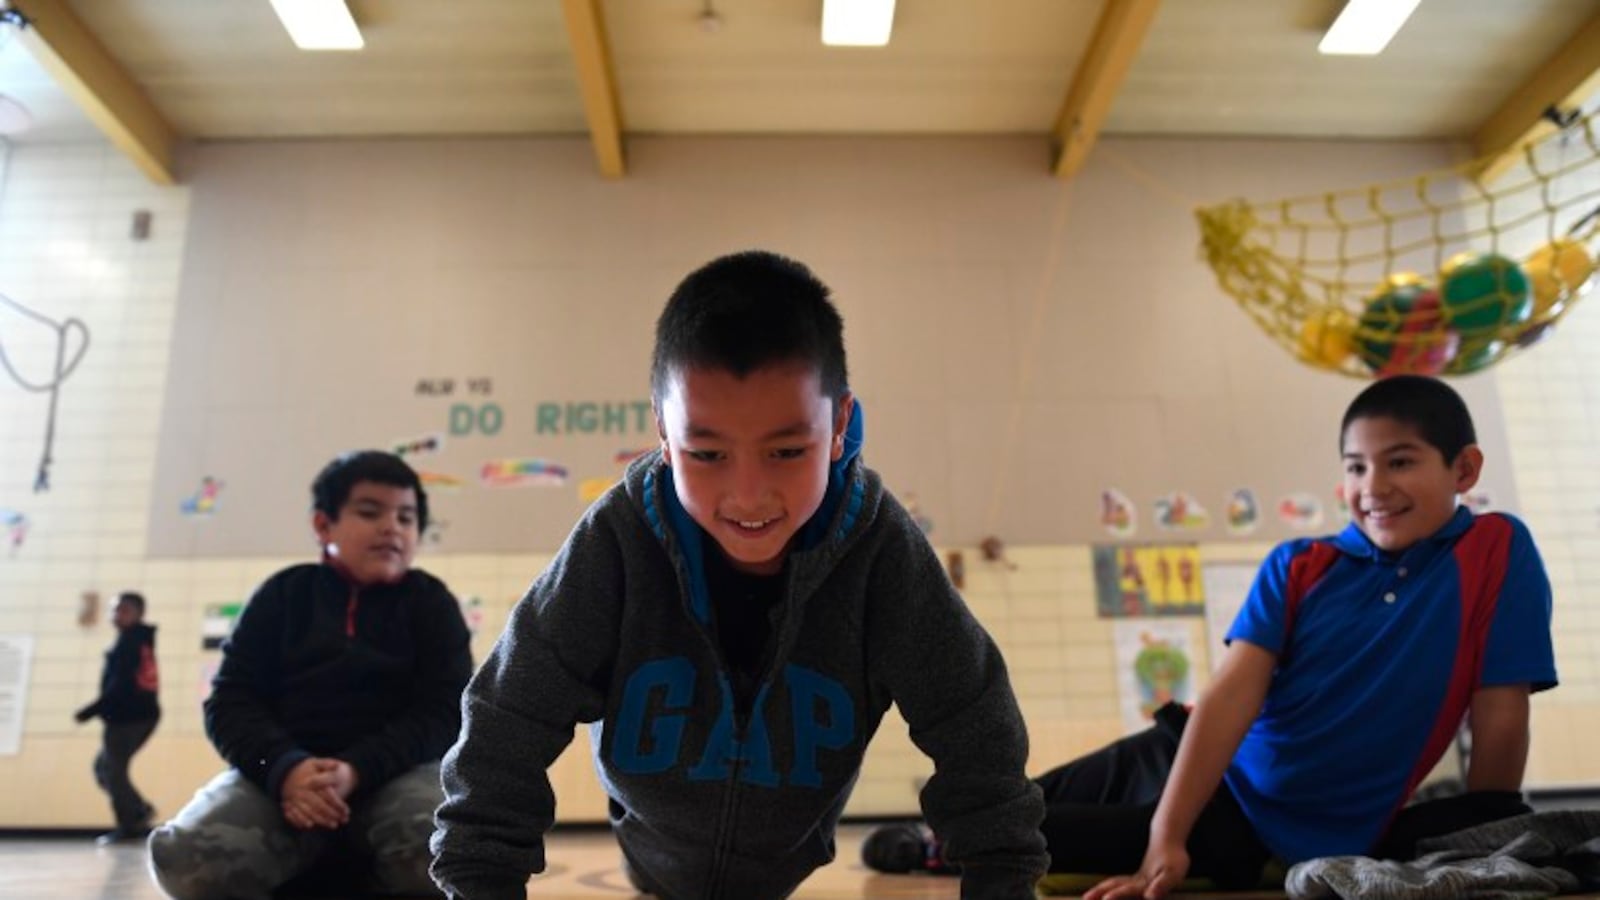 Students during PE class at Lyn Knoll Elementary School in 2016 in Aurora, Colorado. (Photo by Helen H. Richardson/The Denver Post)